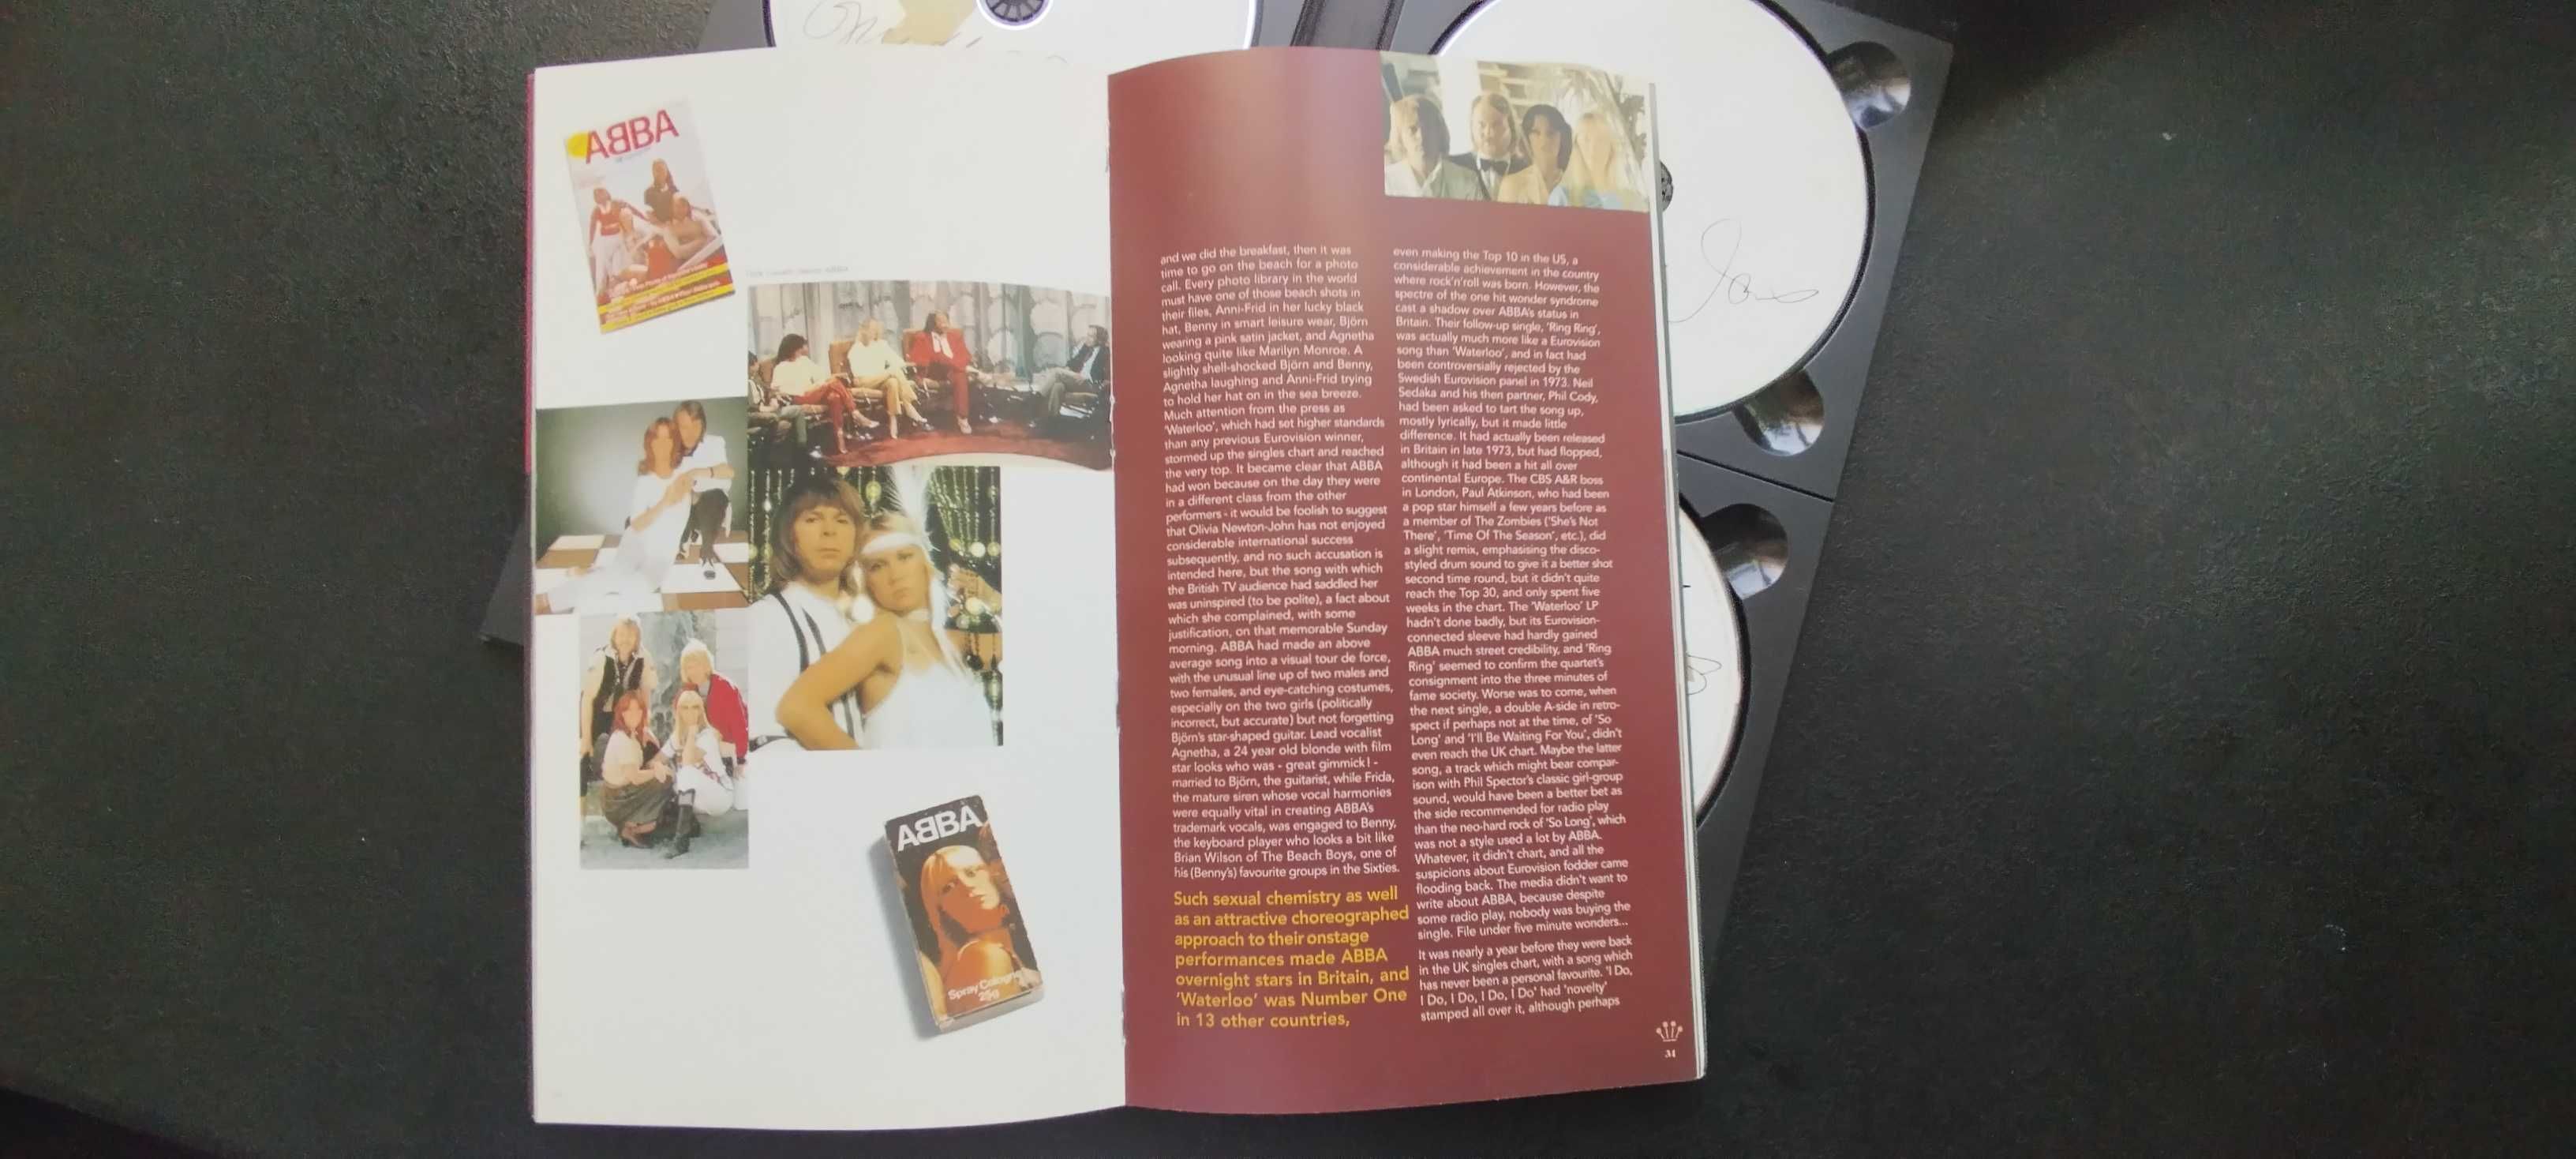 ABBA - THANK YOU FOR THE MUSIC - 4 CD Box Set Numer edycji 101815